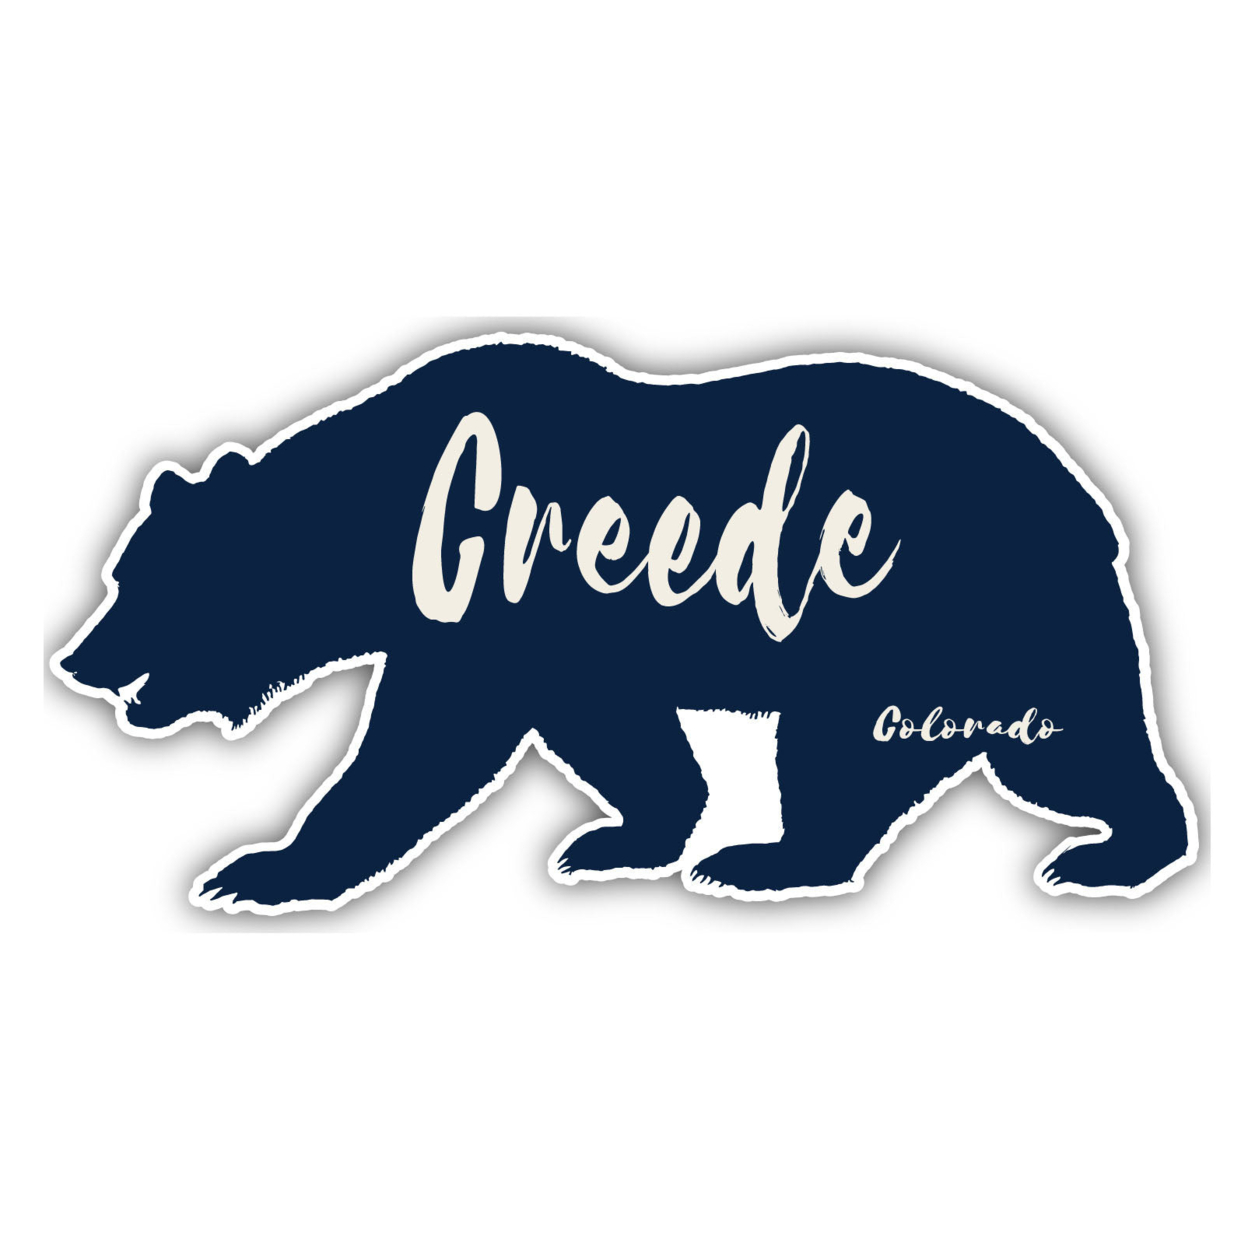 Creede Colorado Souvenir Decorative Stickers (Choose Theme And Size) - 4-Pack, 4-Inch, Camp Life